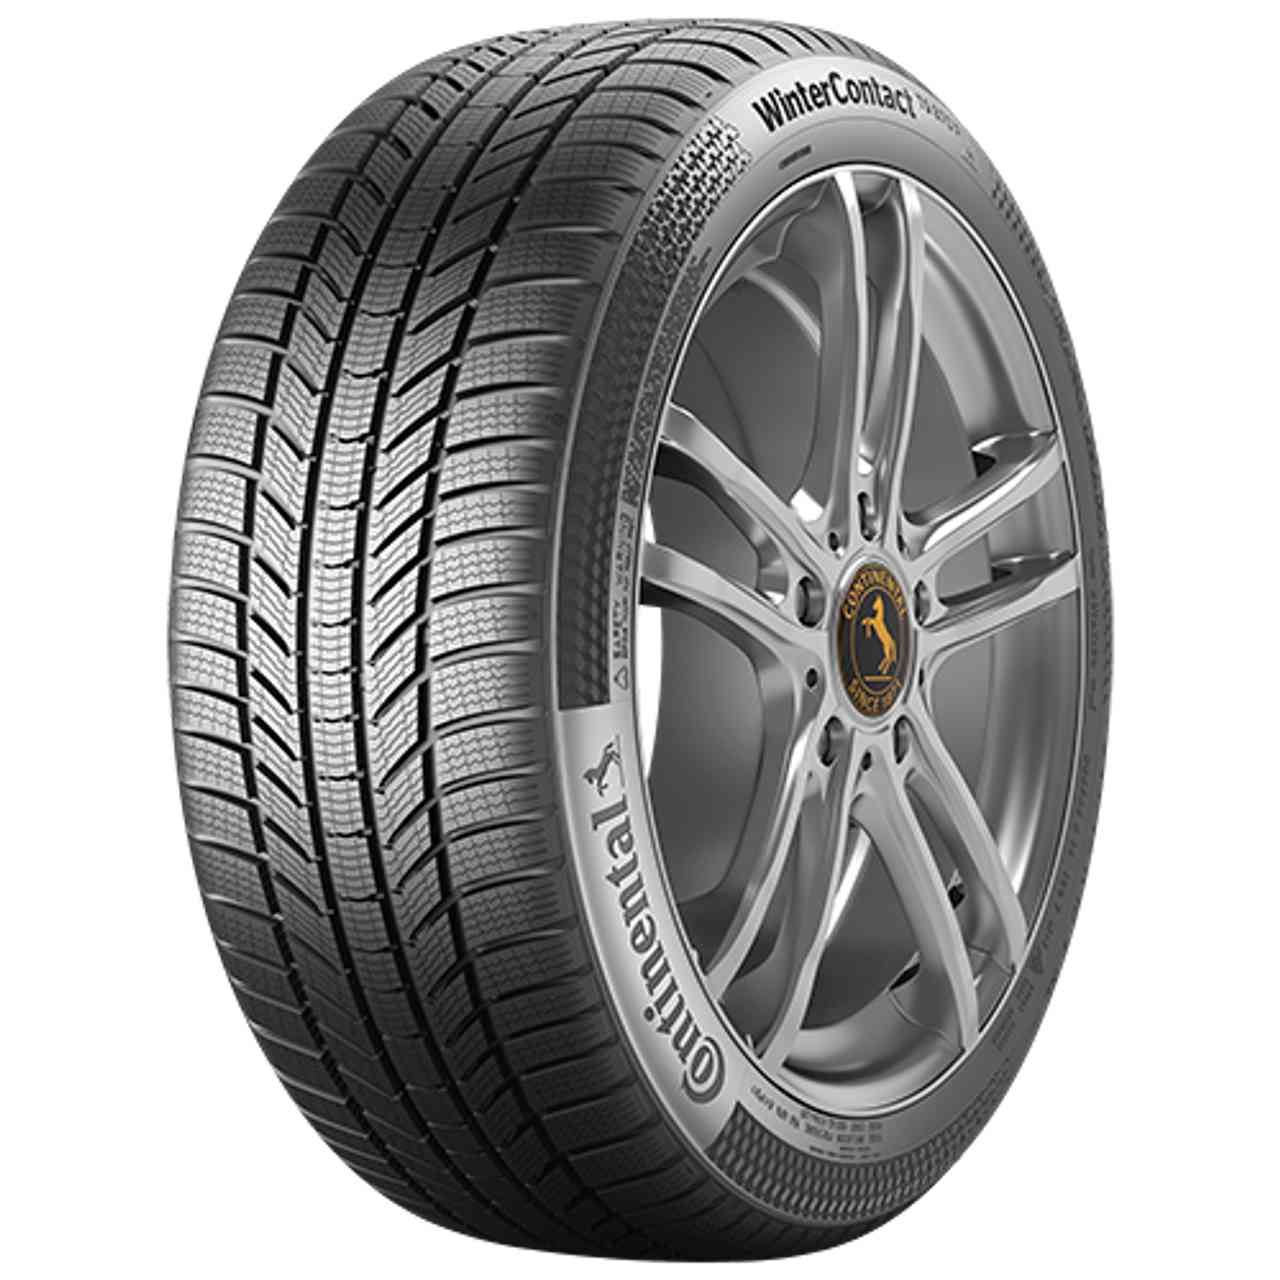 CONTINENTAL WINTERCONTACT TS 870 P (EVc) 205/55R17 95V BSW von Continental